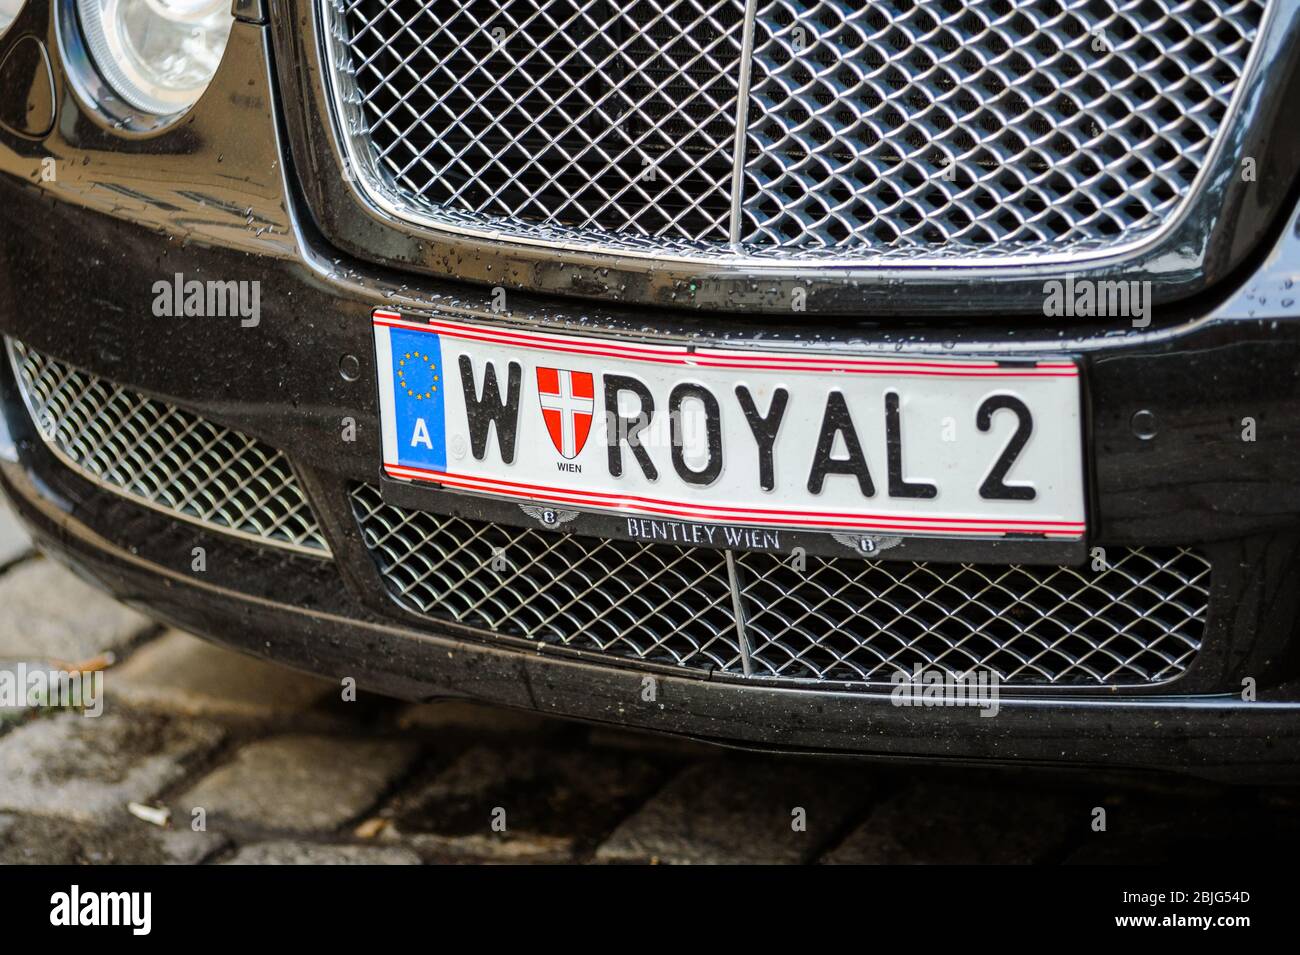 Vienna, Austrian - Jul 5, 2011: Royal 2 licensing number plate on luxury  Bentley car parked in city center of Vienna, Austria Stock Photo - Alamy